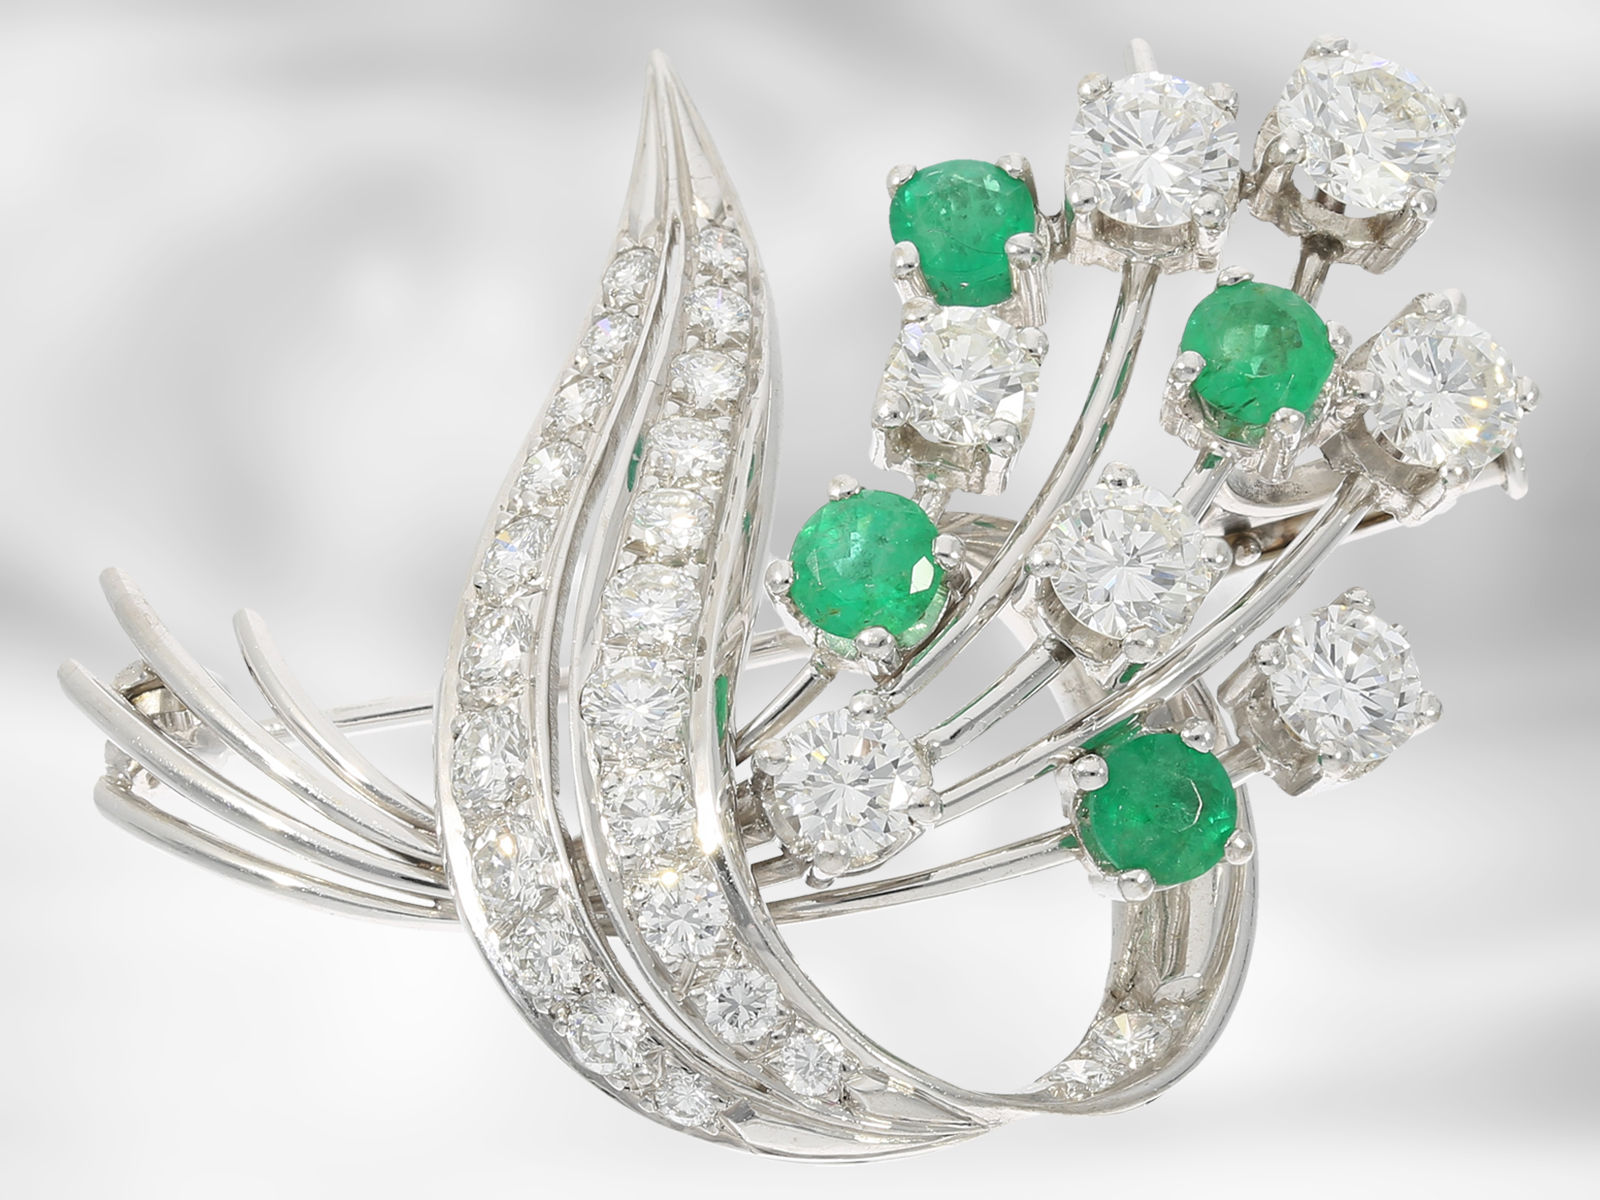 Decorative vintage brooch with diamonds and emeralds, total approx. 3.46ct, 18K white gold, Court Je - Image 2 of 3